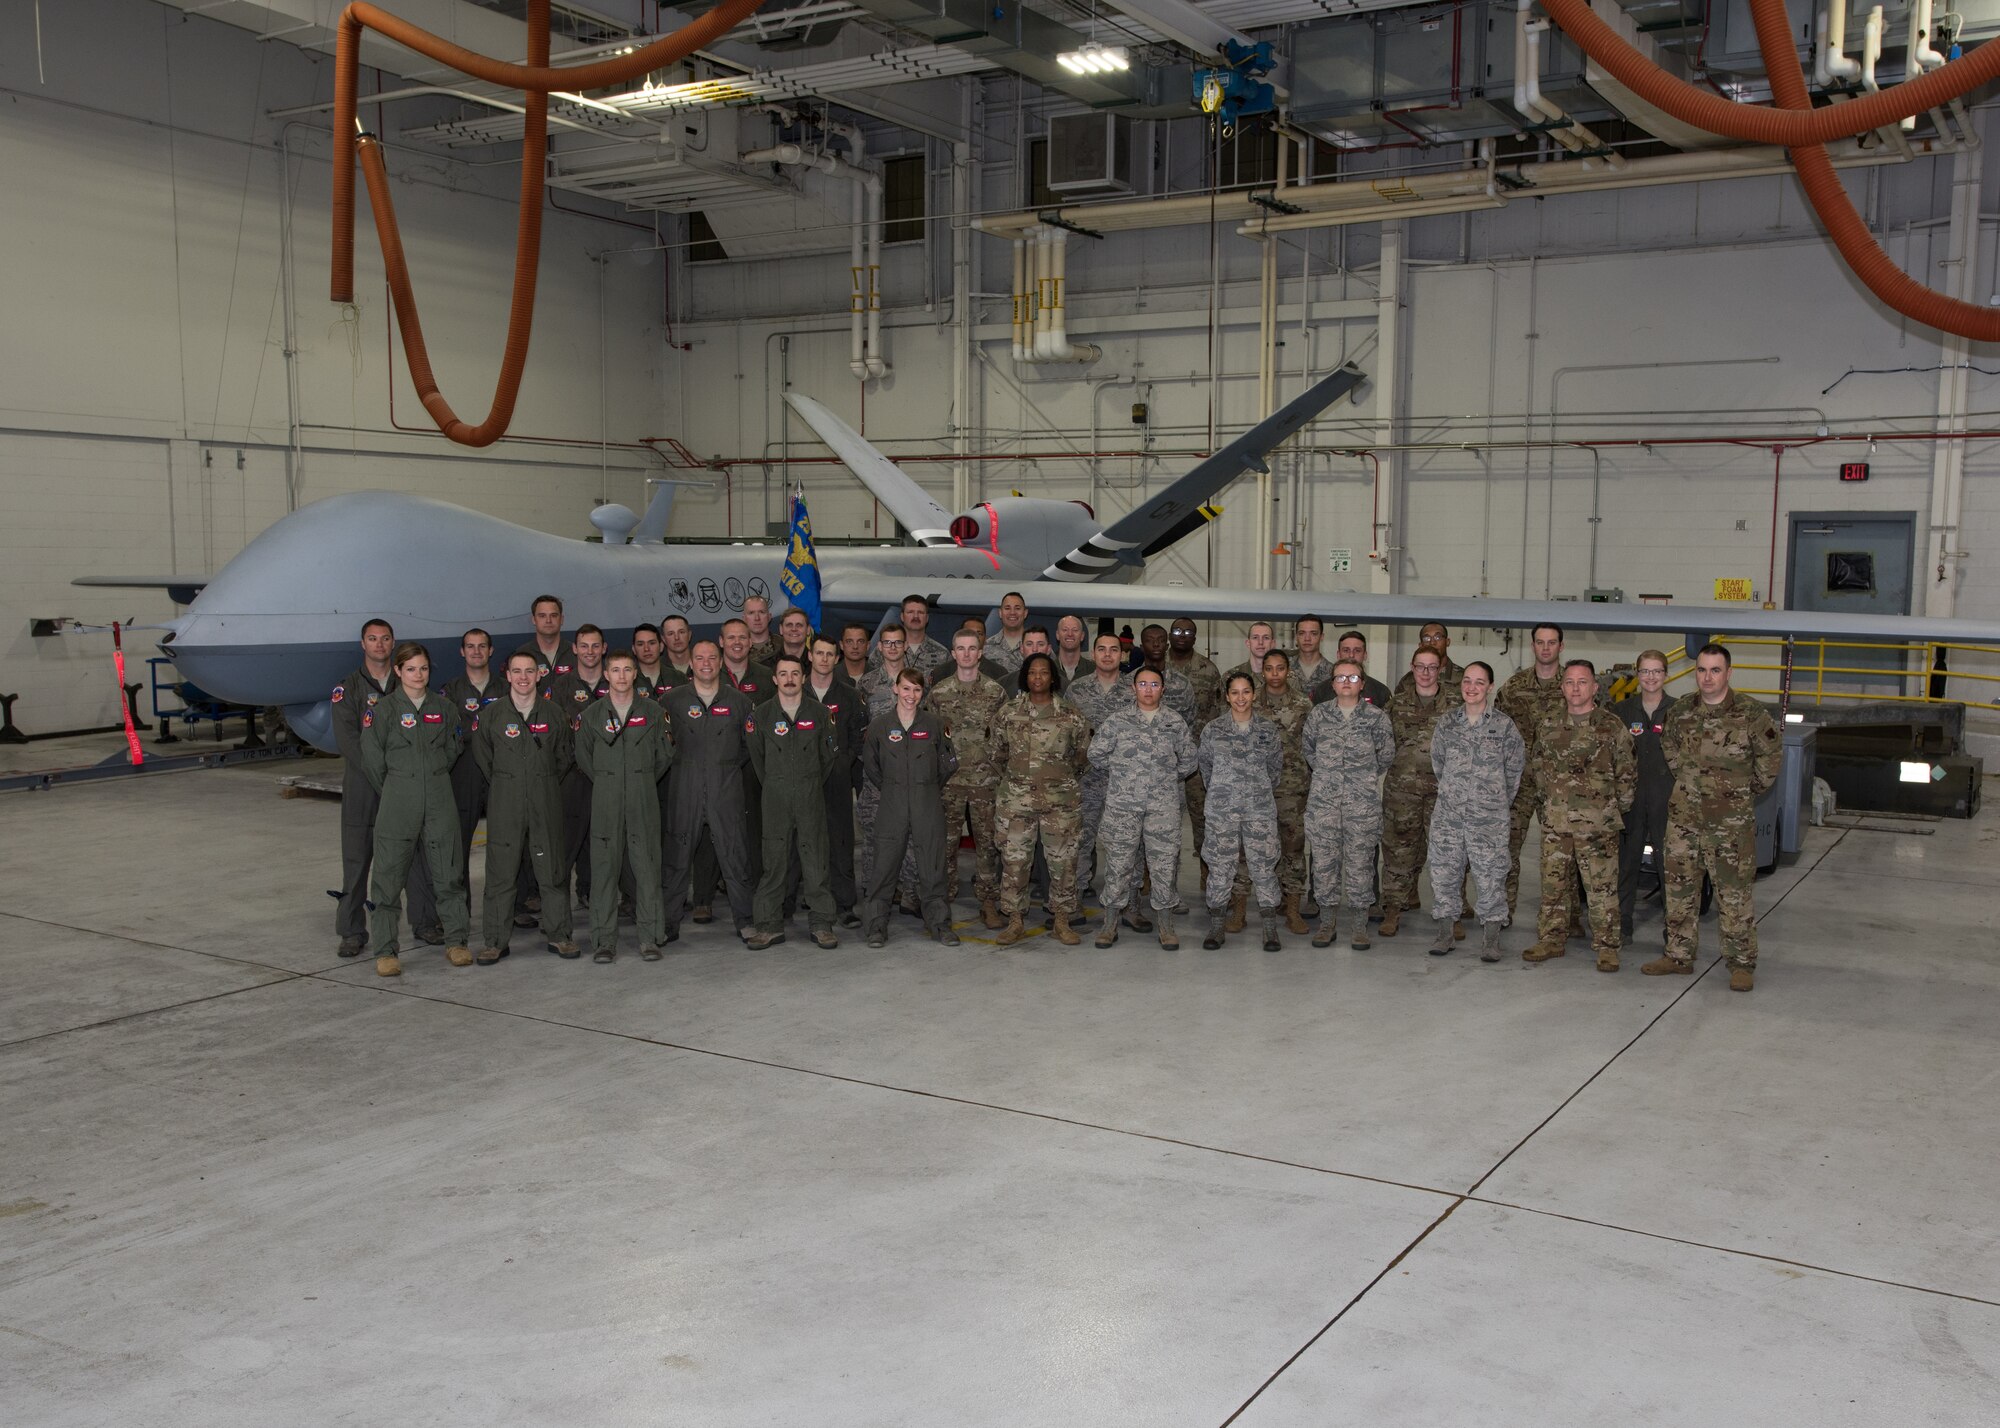 Airmen with the 20th Attack Squadron pose for a group photo in front of an MQ-9 Reaper, at Whiteman Air Force Base, Missouri, June 17, 2019. The 20th ATKS is a geographically separated unit that falls under the 432nd Wing/432nd Air Expeditionary Wing and supports combatant commanders in operations abroad. (U.S. Air Force photo by Airman 1st Class Parker J. McCauley)